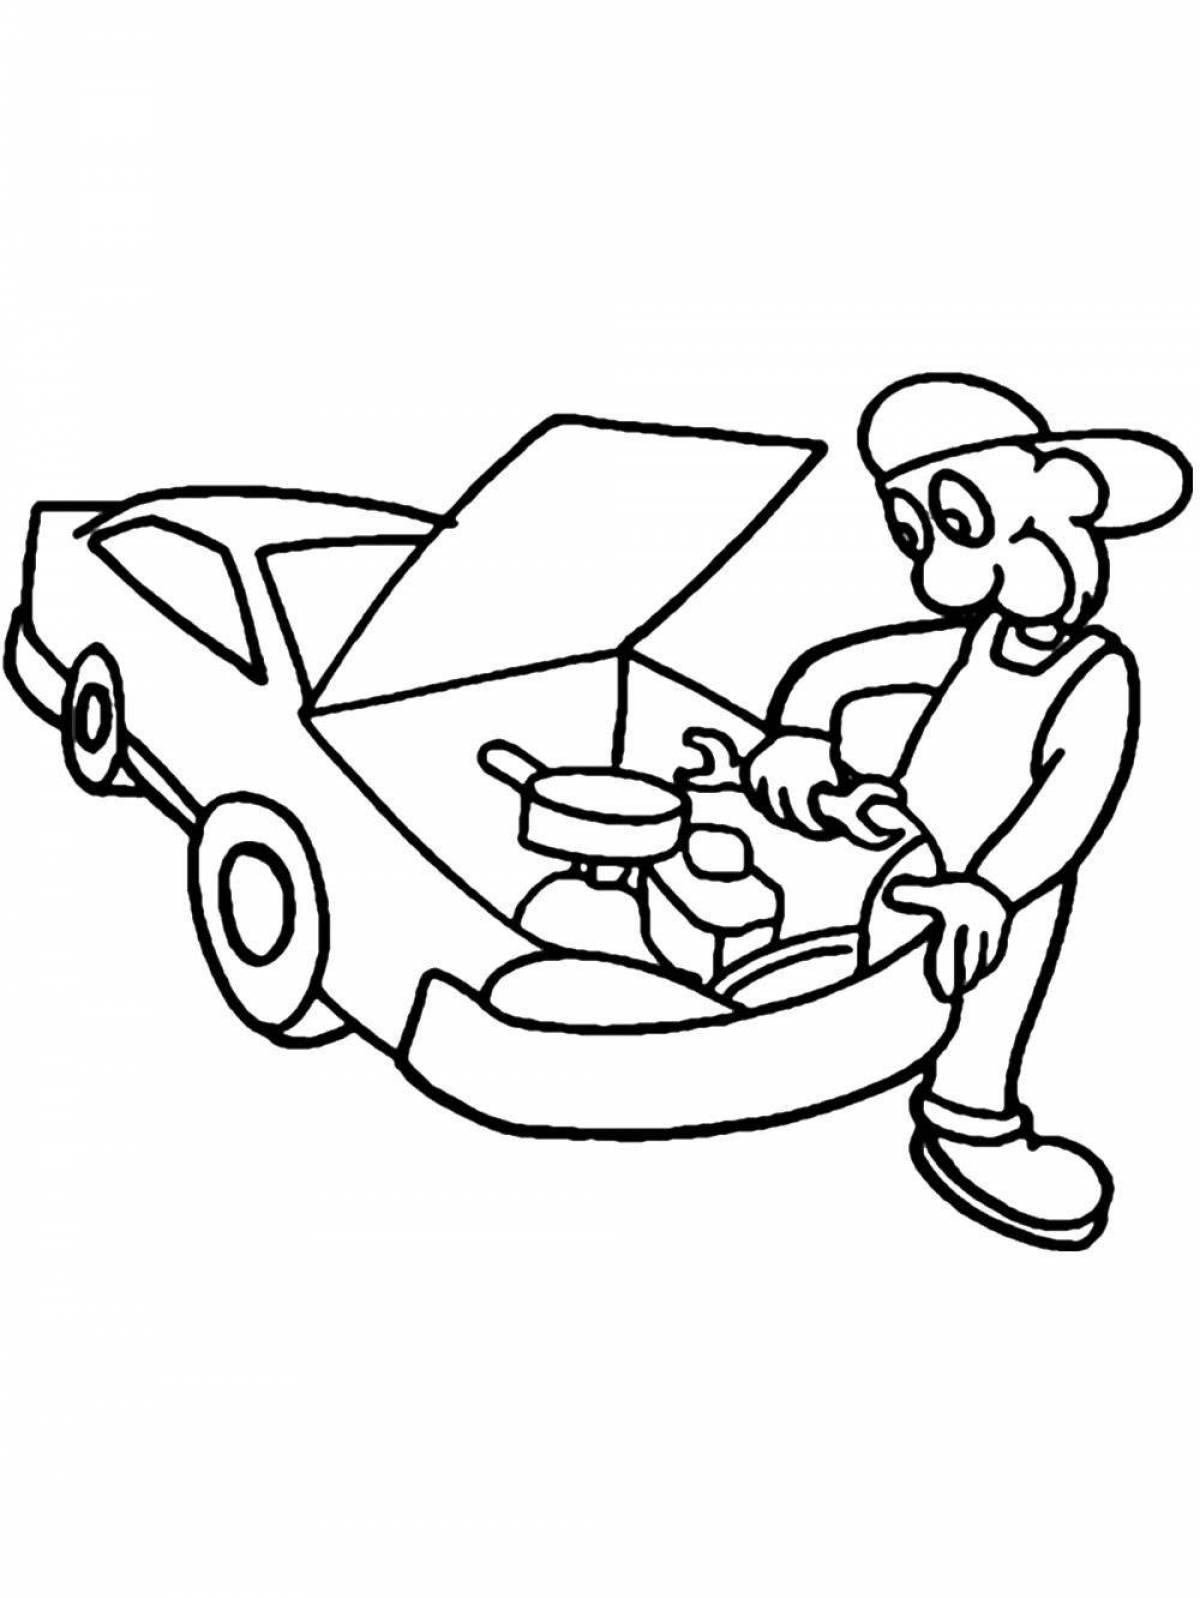 Colorful car mechanic coloring page